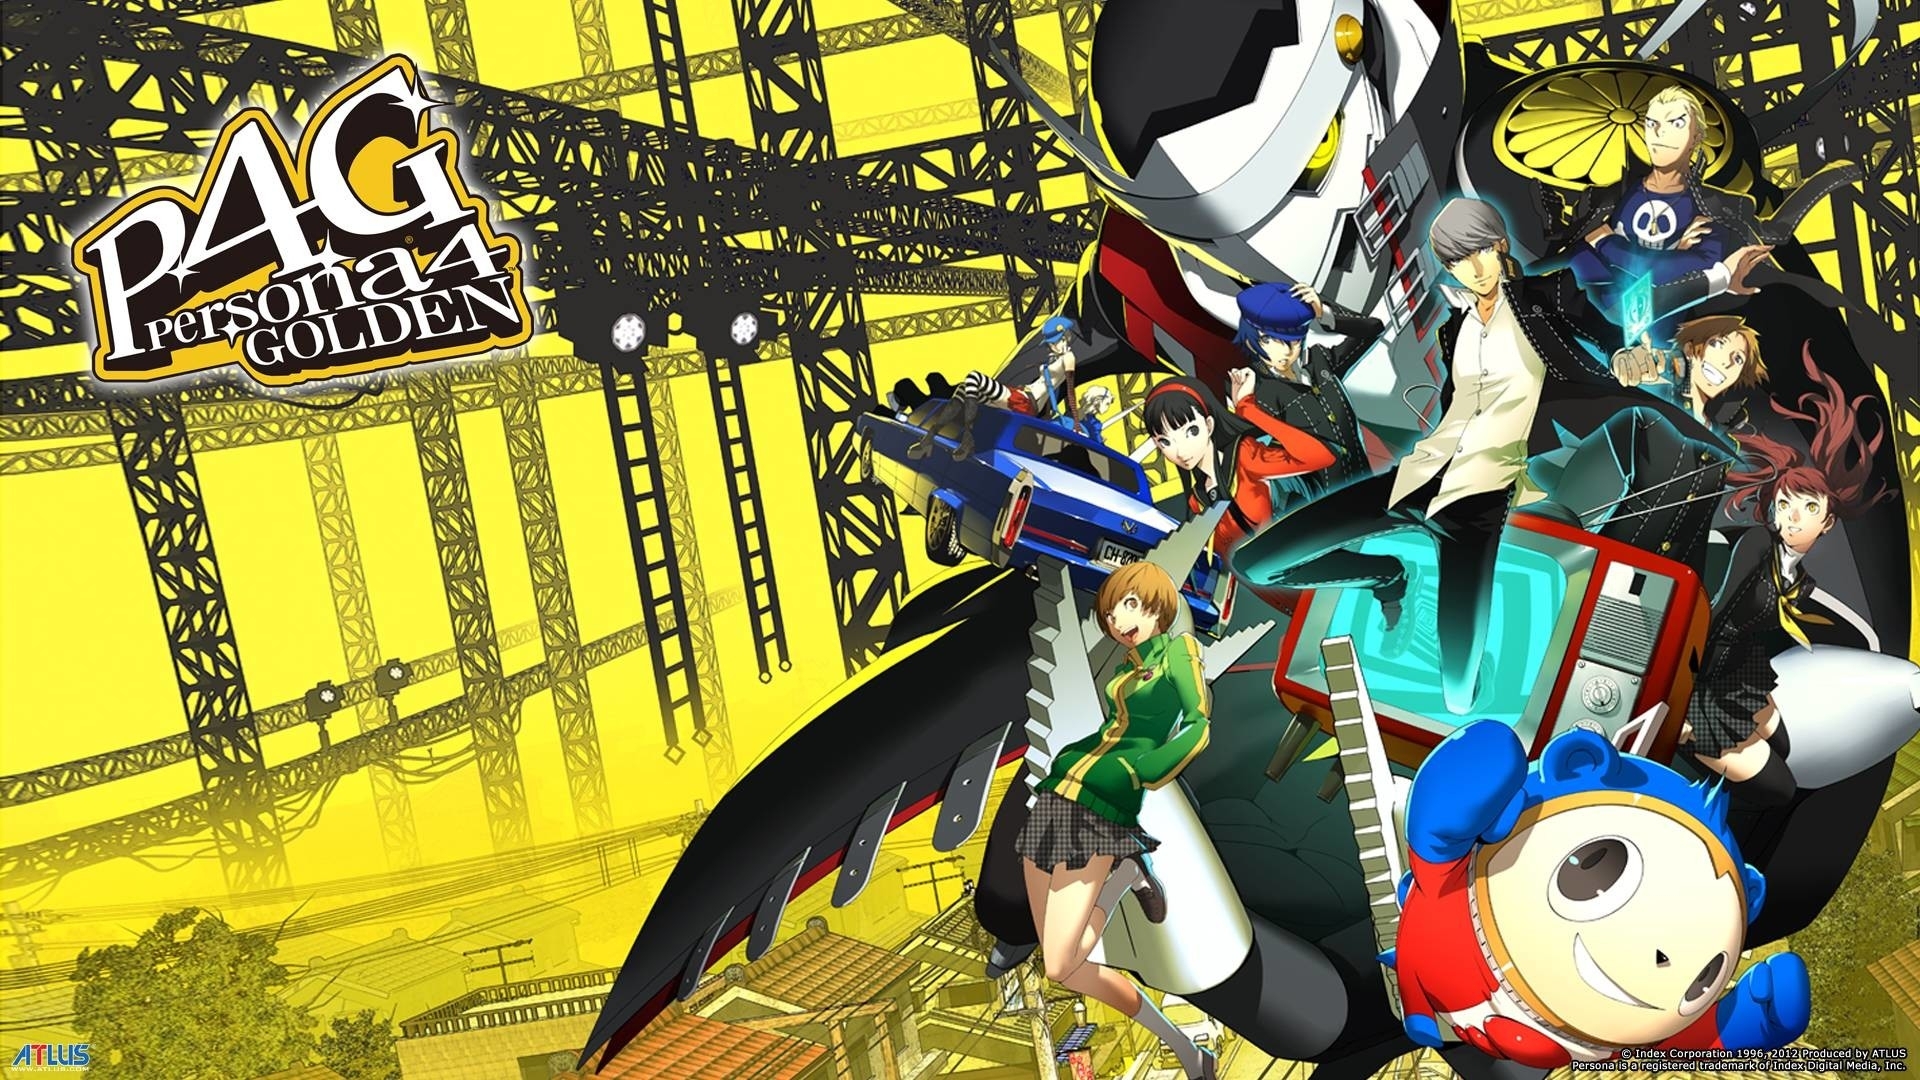 10 Best Persona 4 Wallpaper 1920X1080 FULL HD 1080p For PC Background